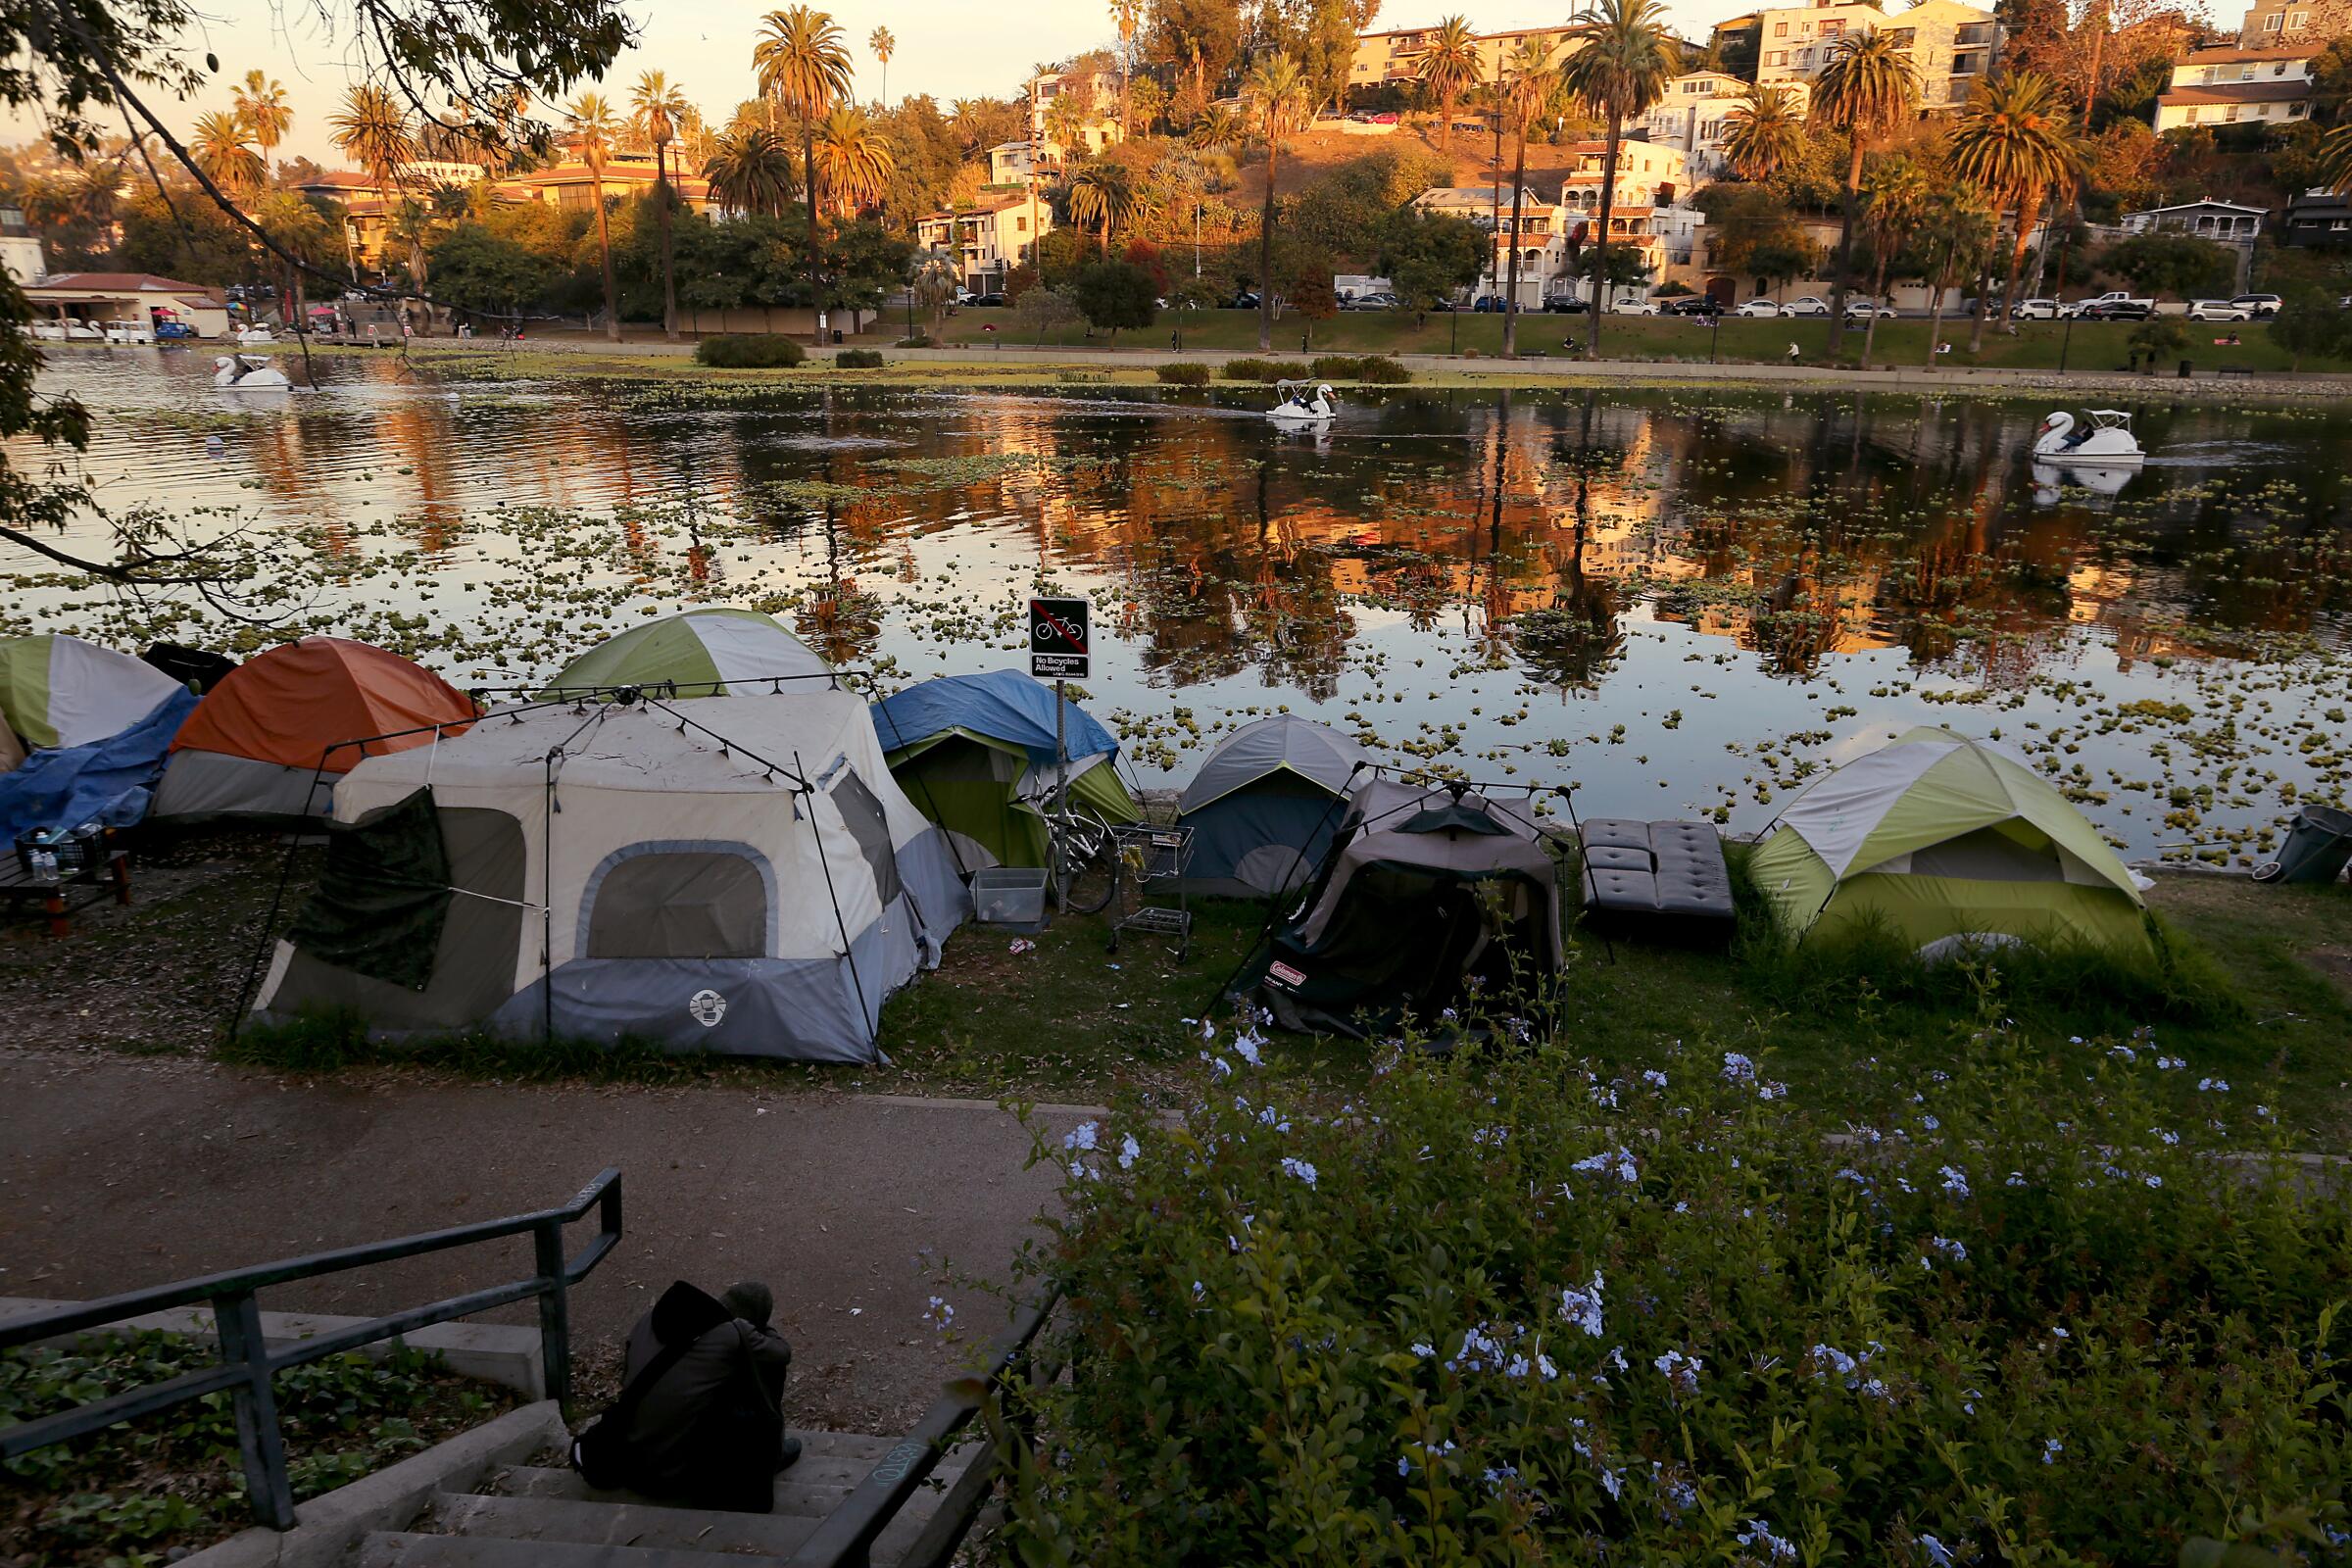 A homeless encampment sits in shadow on the banks of a lake, with houses illuminated by sunlight in the distance. 